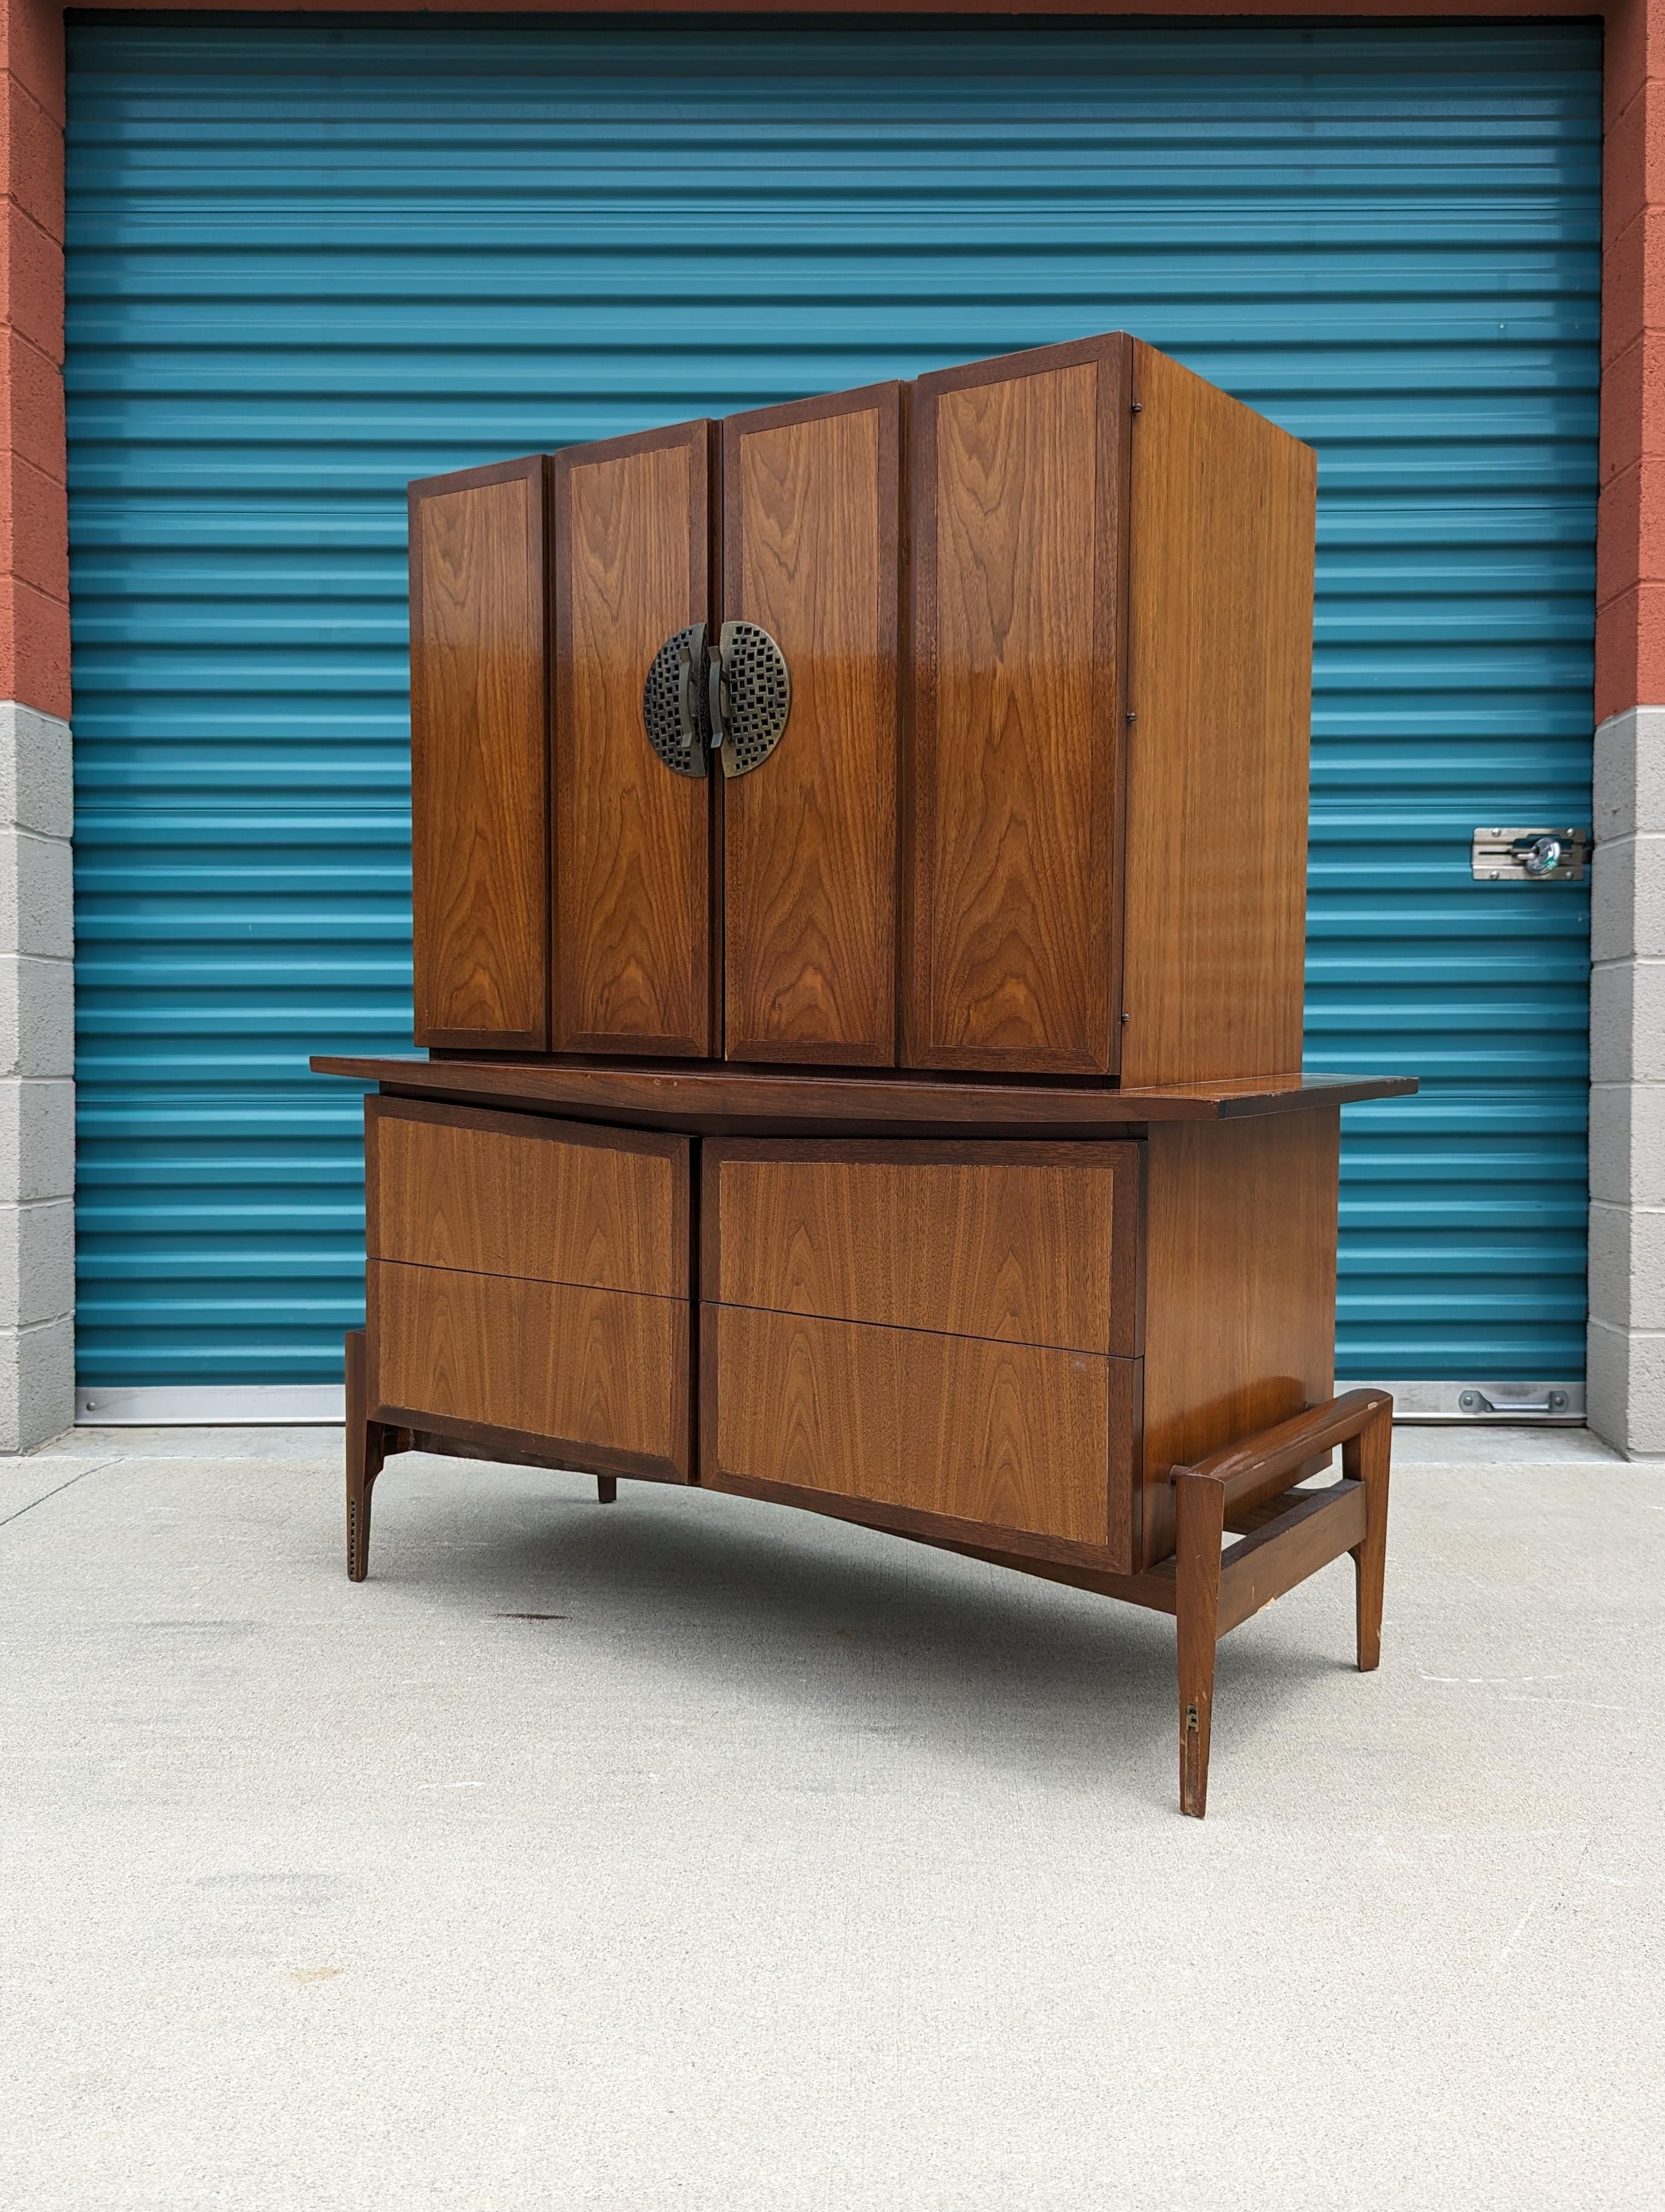 Just in, a walnut and bronze highboy/gentleman's chest by Helen Hobey Baker, c1960s. This piece is in original condition and features a walnut finish with a skeletal base making it almost seem like it's suspended in air. Two doors on the upper